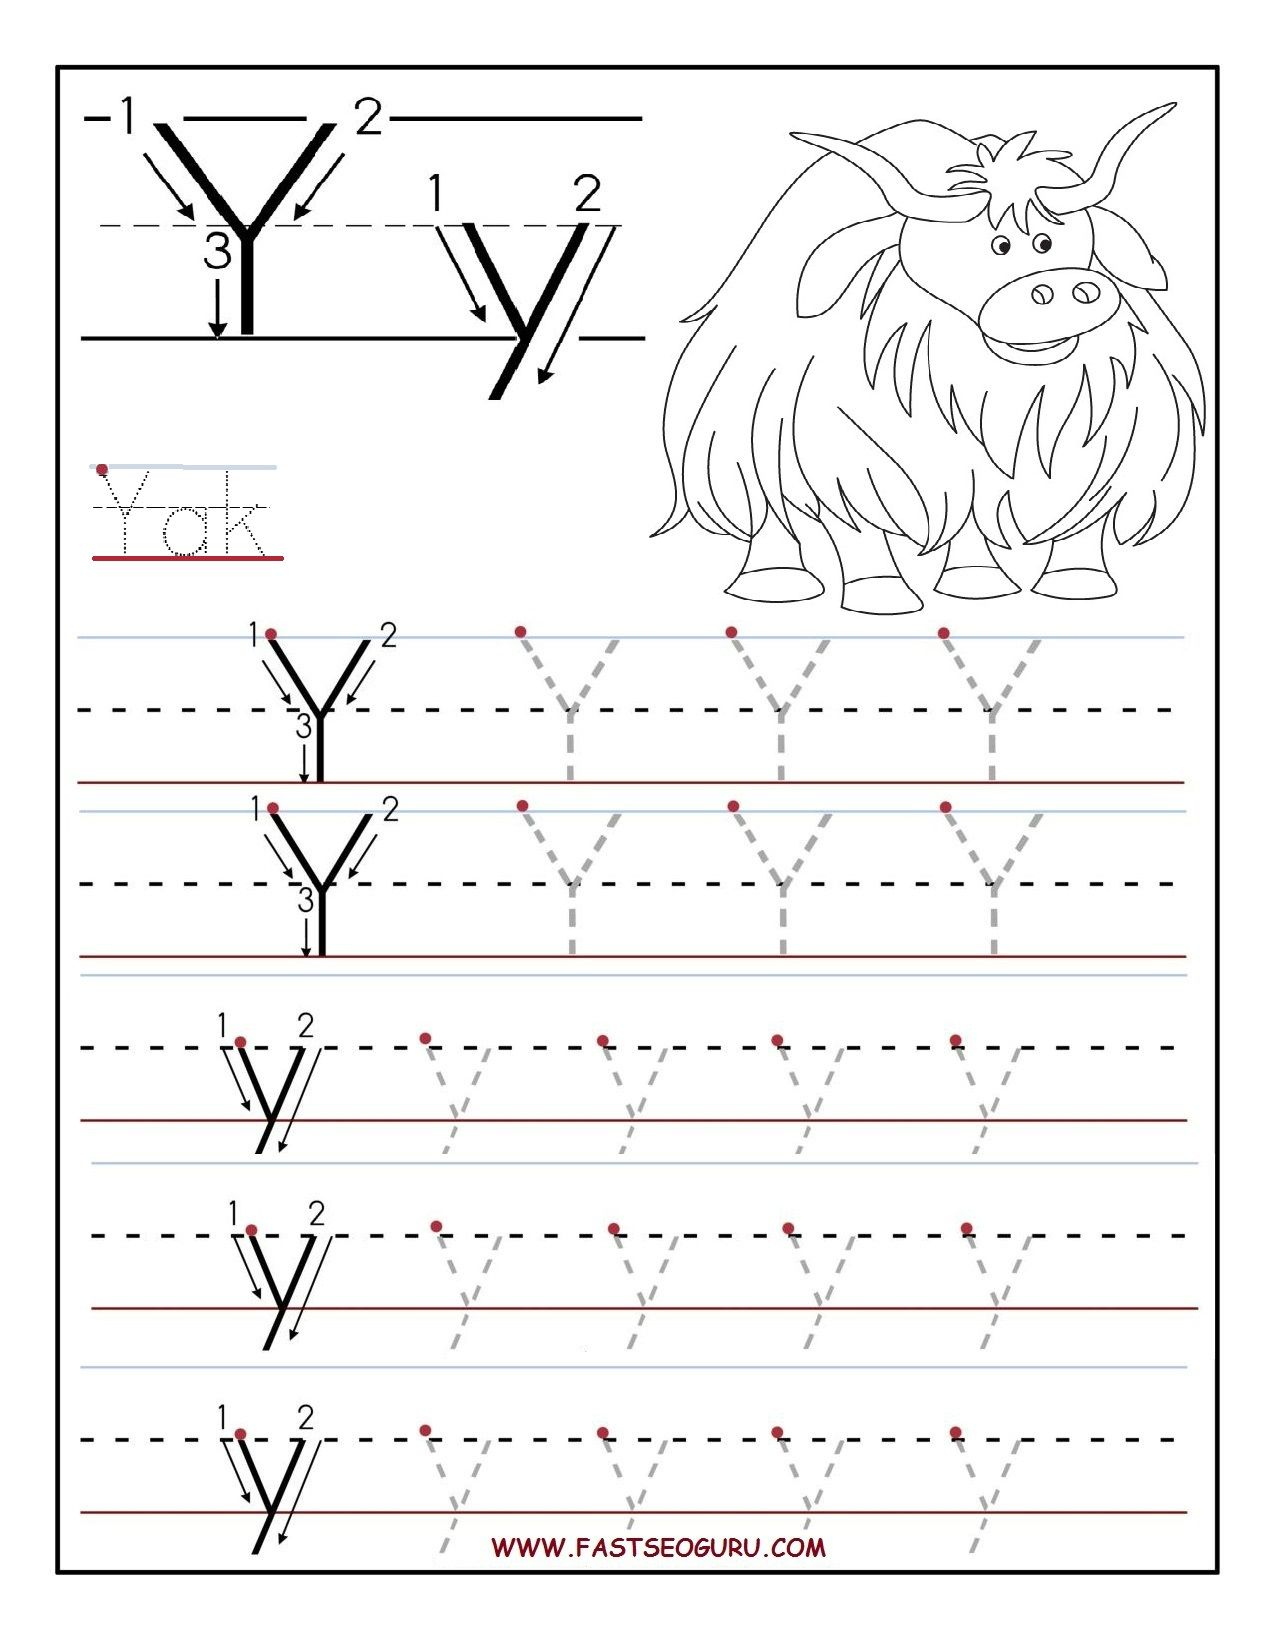 Printable Letter Y Tracing Worksheets For Preschool within Letter Y Worksheets For Toddlers